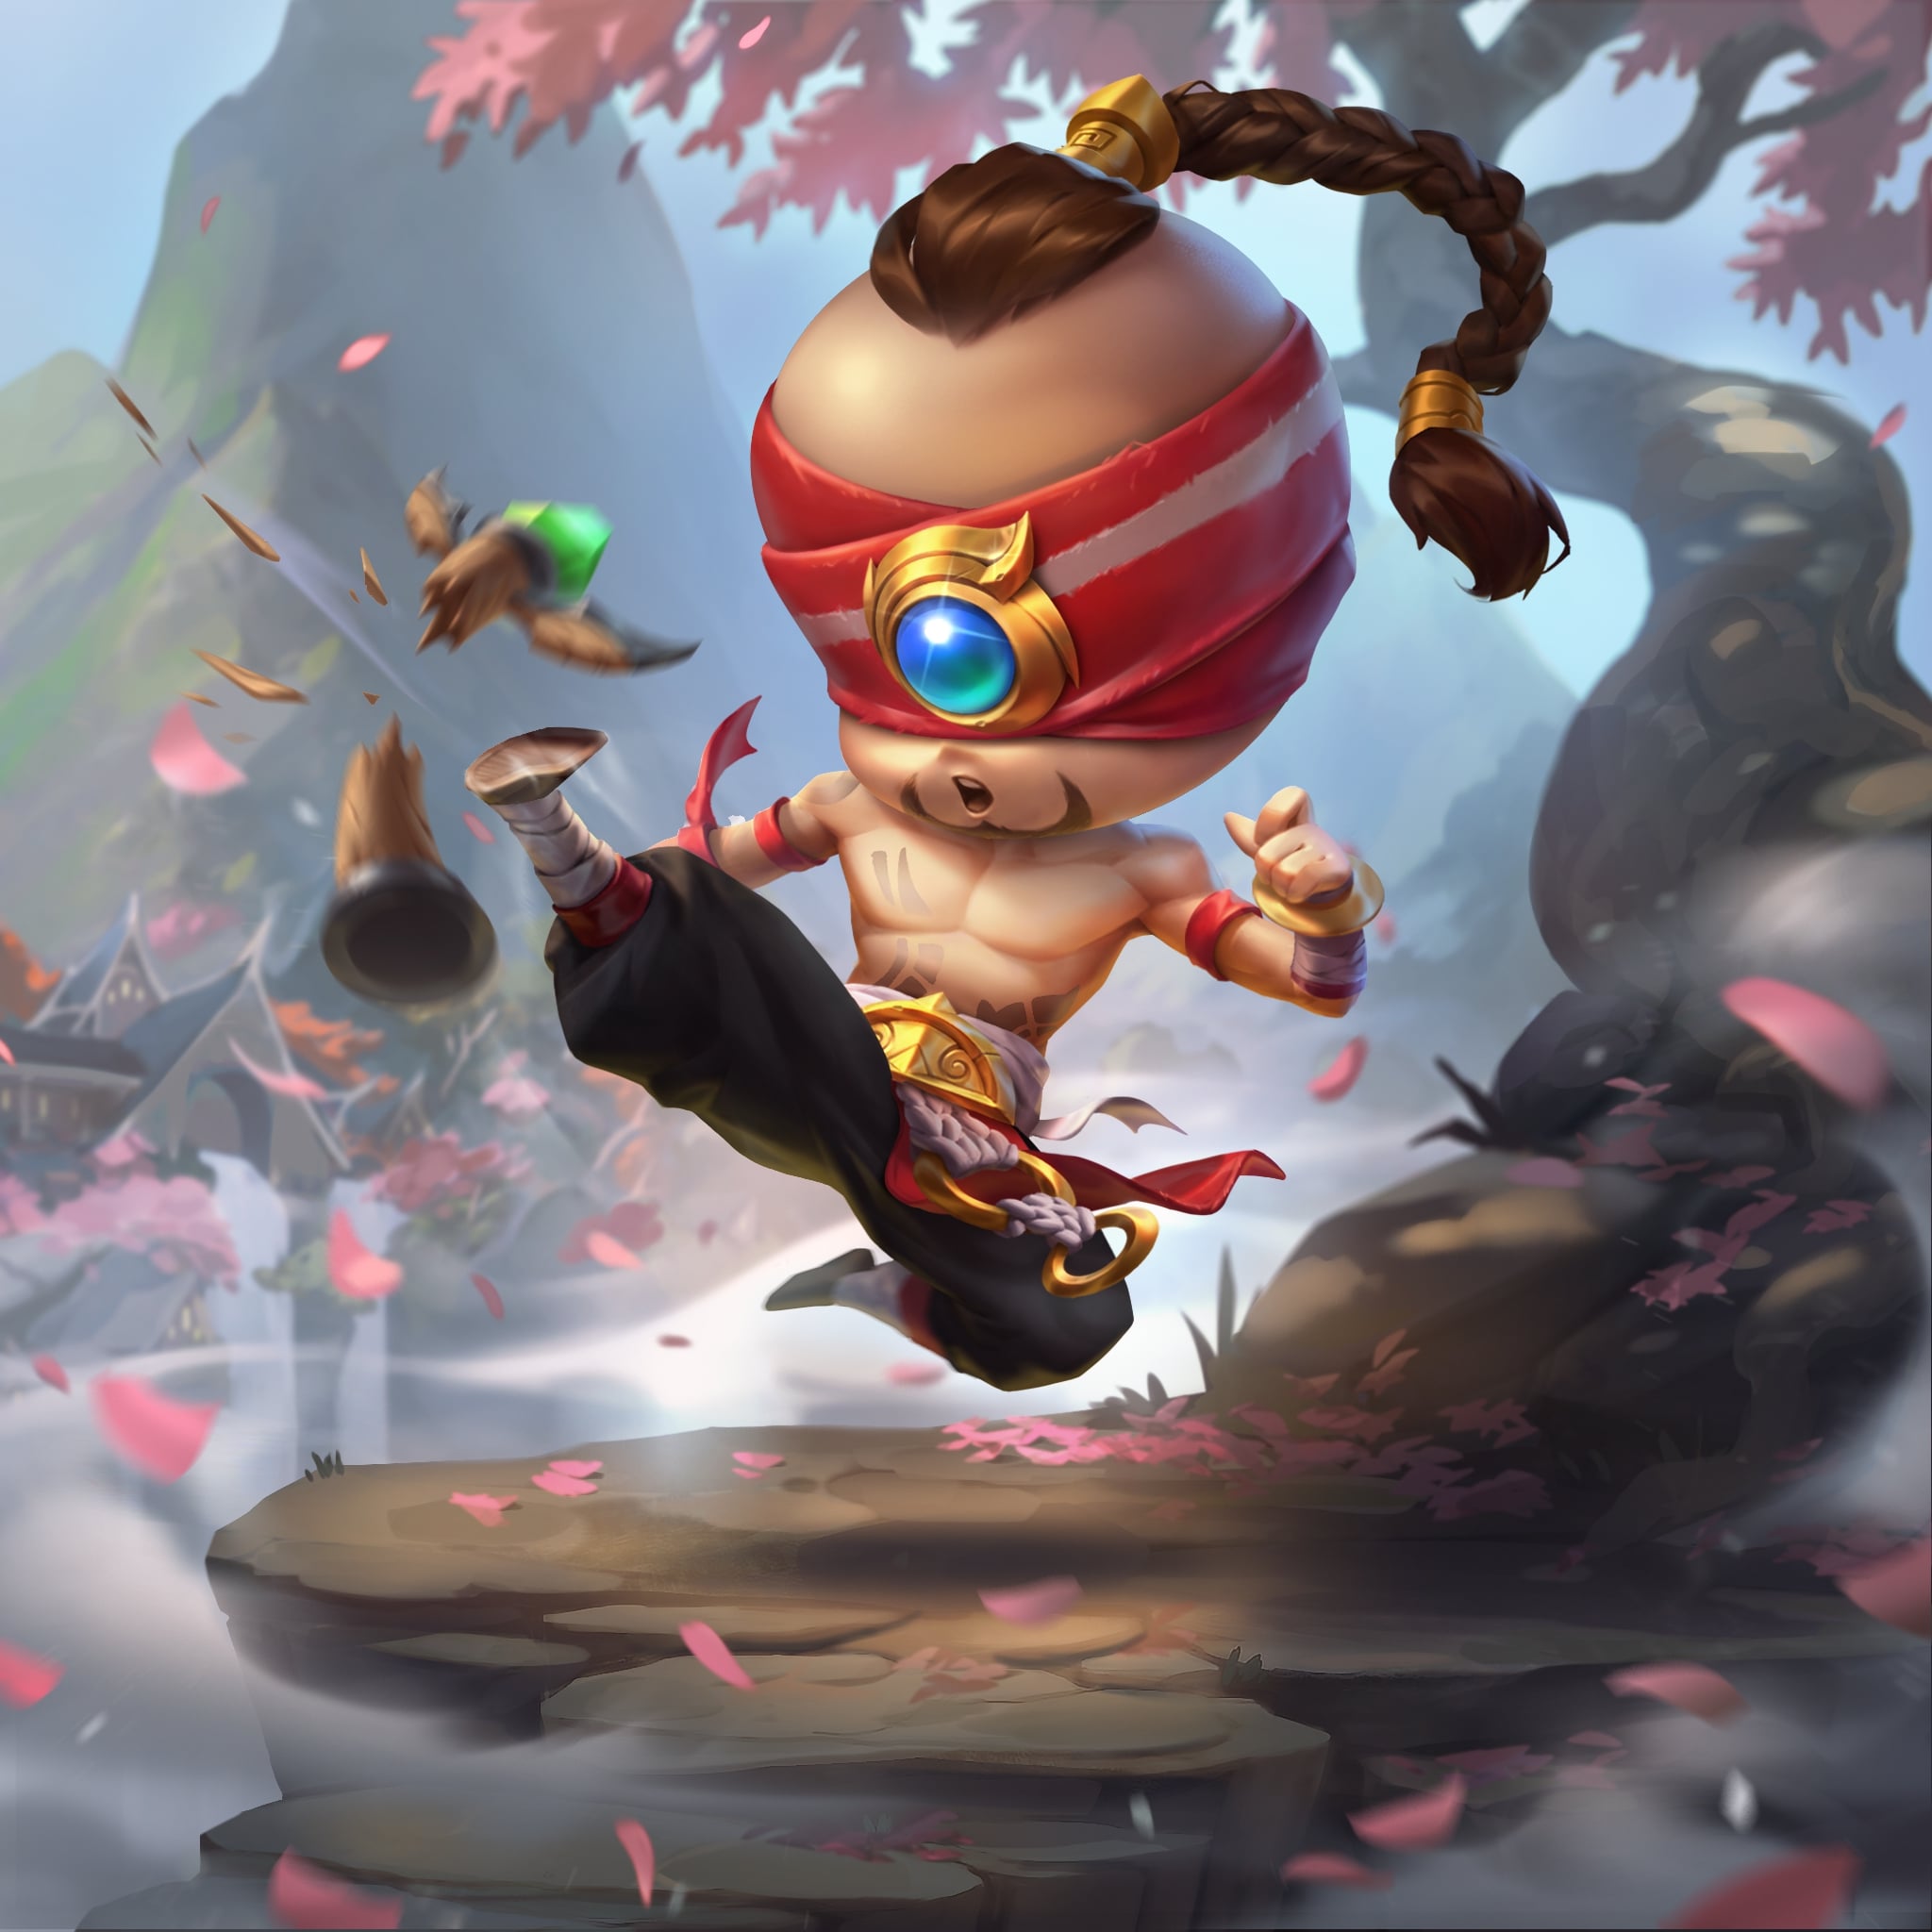 Teamfight Tactics patch 12.17 notes